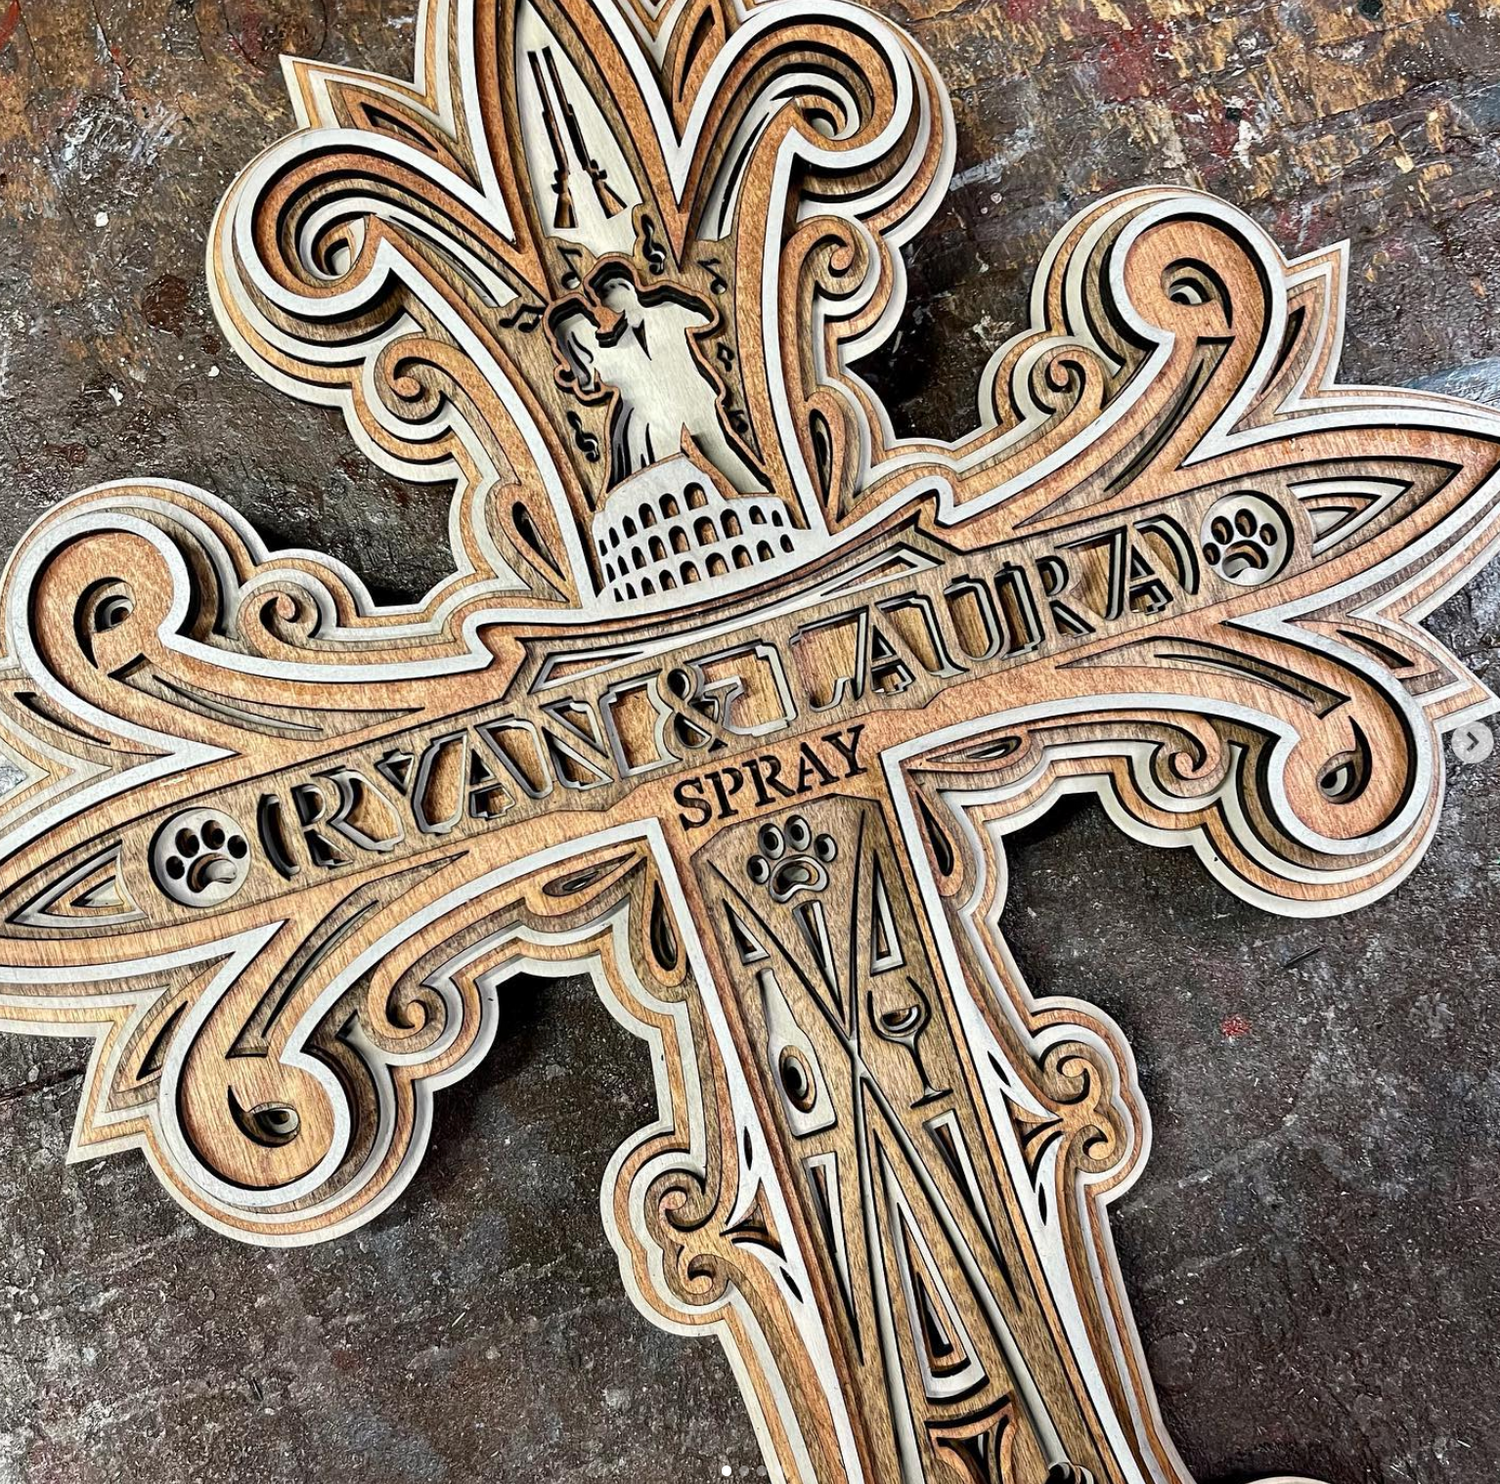 To order our custom cross please click on the contact us tab or email us at handmade@dustysawdeisgns.com. Give us some details and we will set a time to call you to get all the detail for your project. 